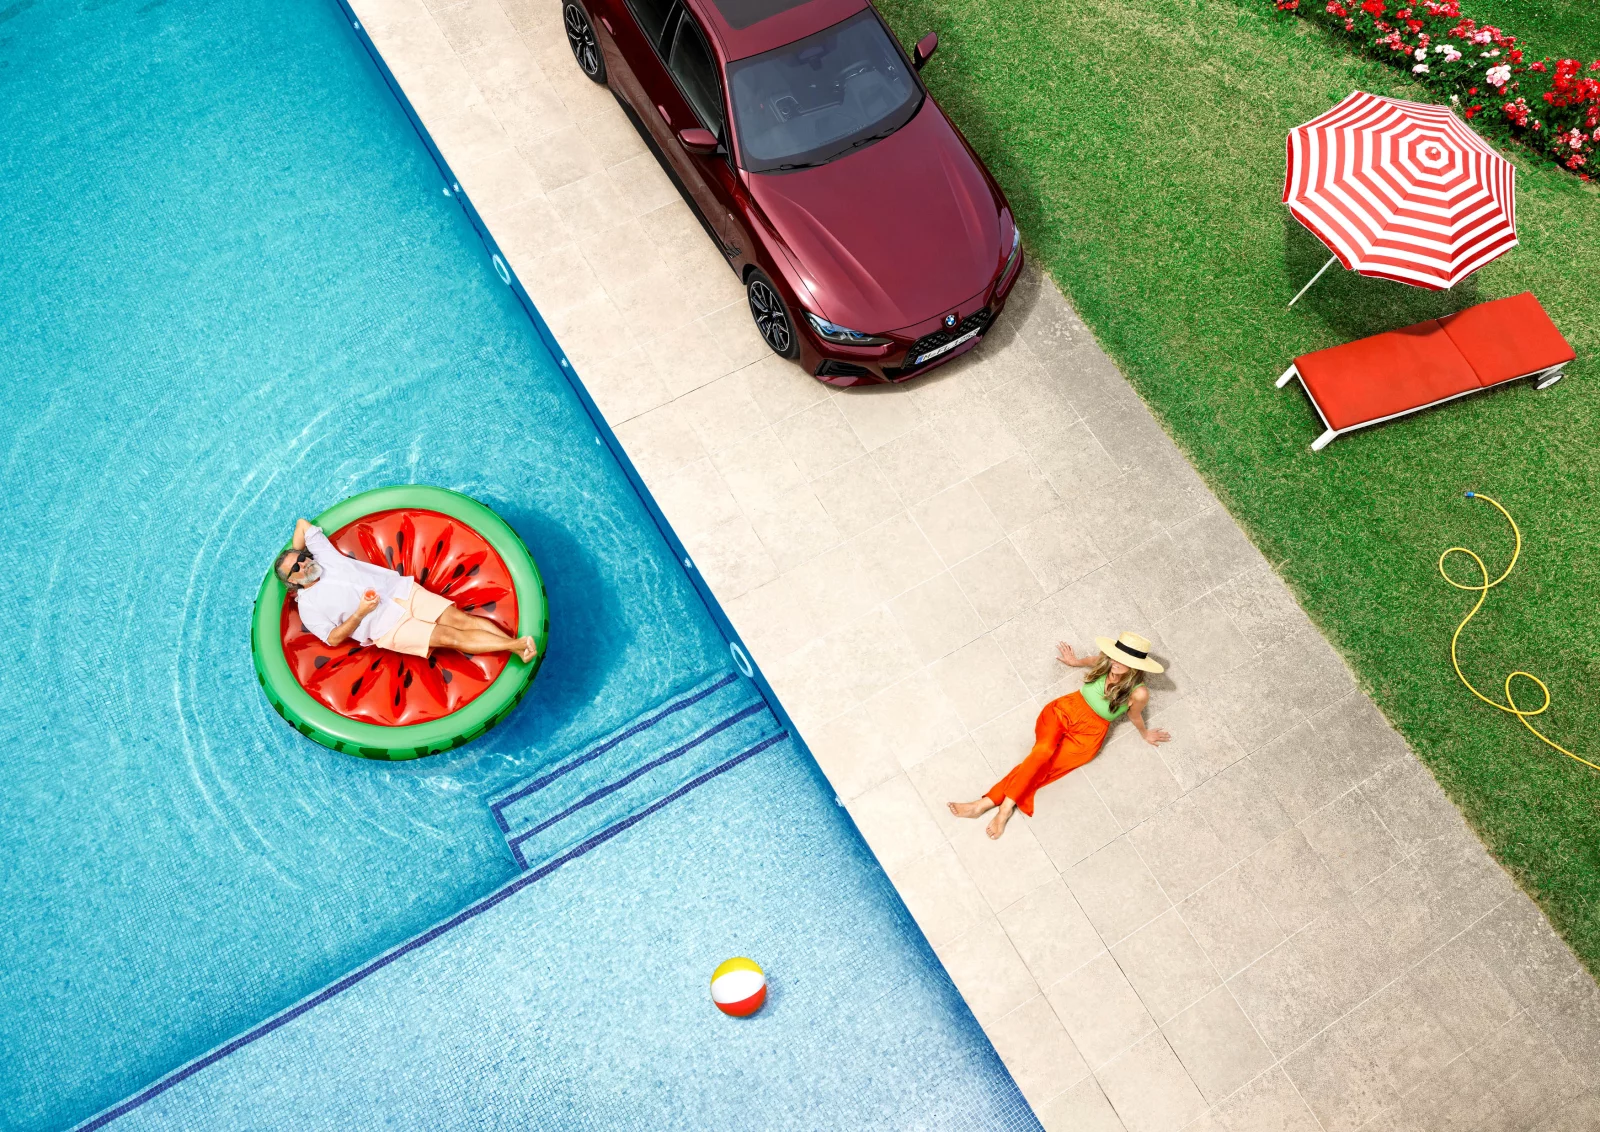 BMW Proactive Care 1 by Clemens ASCHER